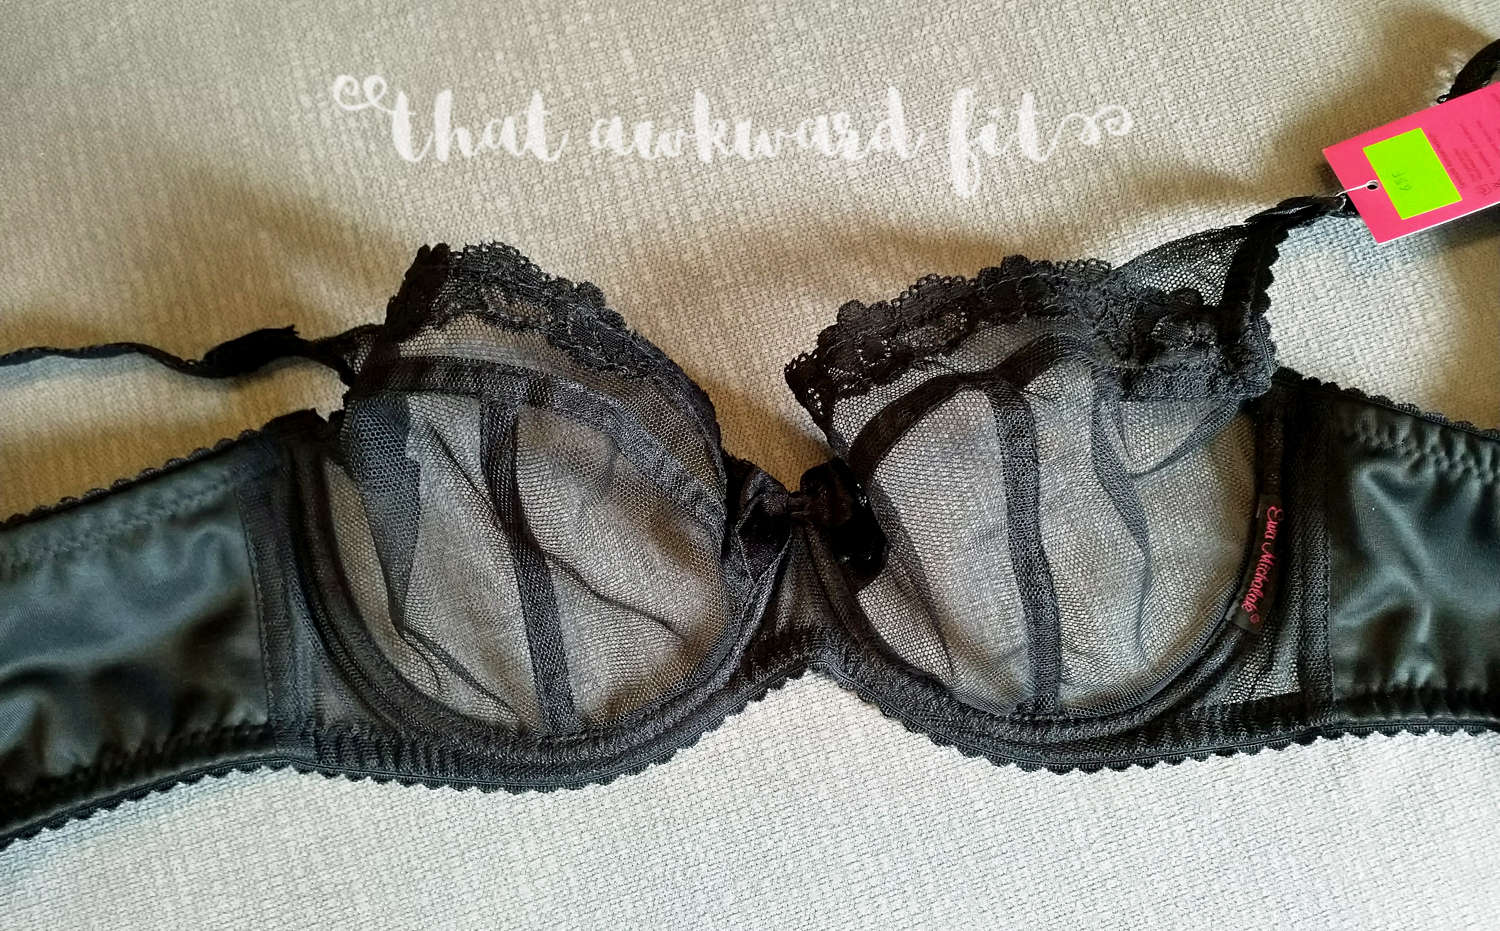 BRANDS \ Ewa Michalak – Forever Yours Lingerie